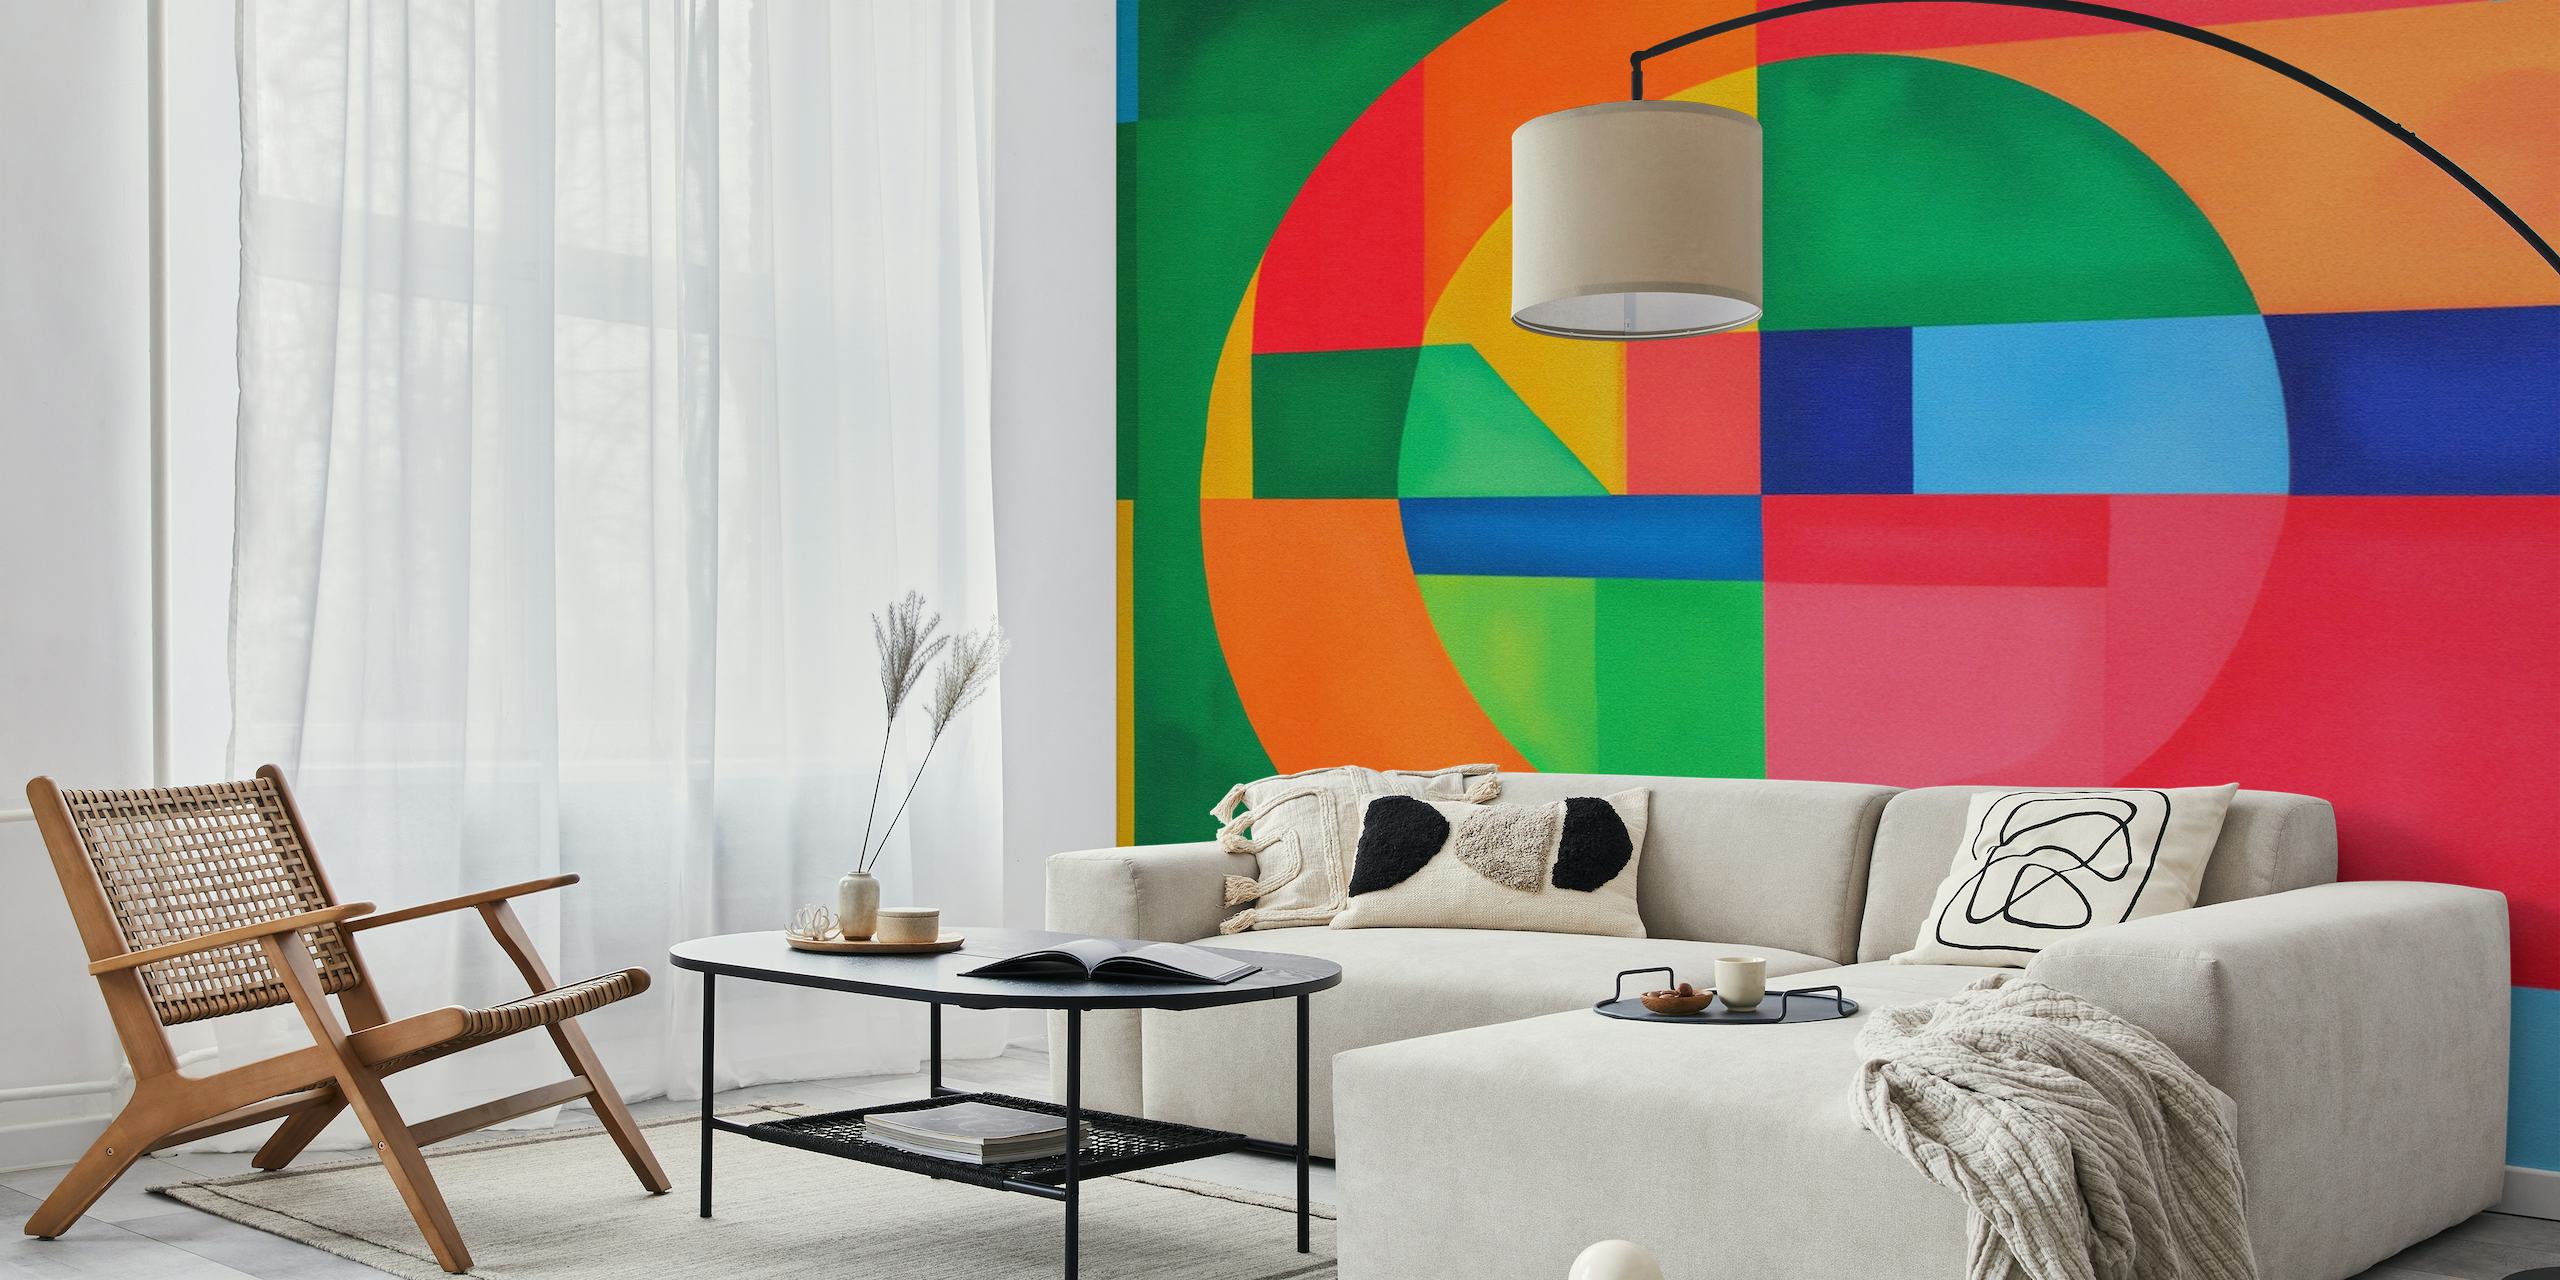 Colorful retro-style abstract geometric wall mural with bold overlapping shapes